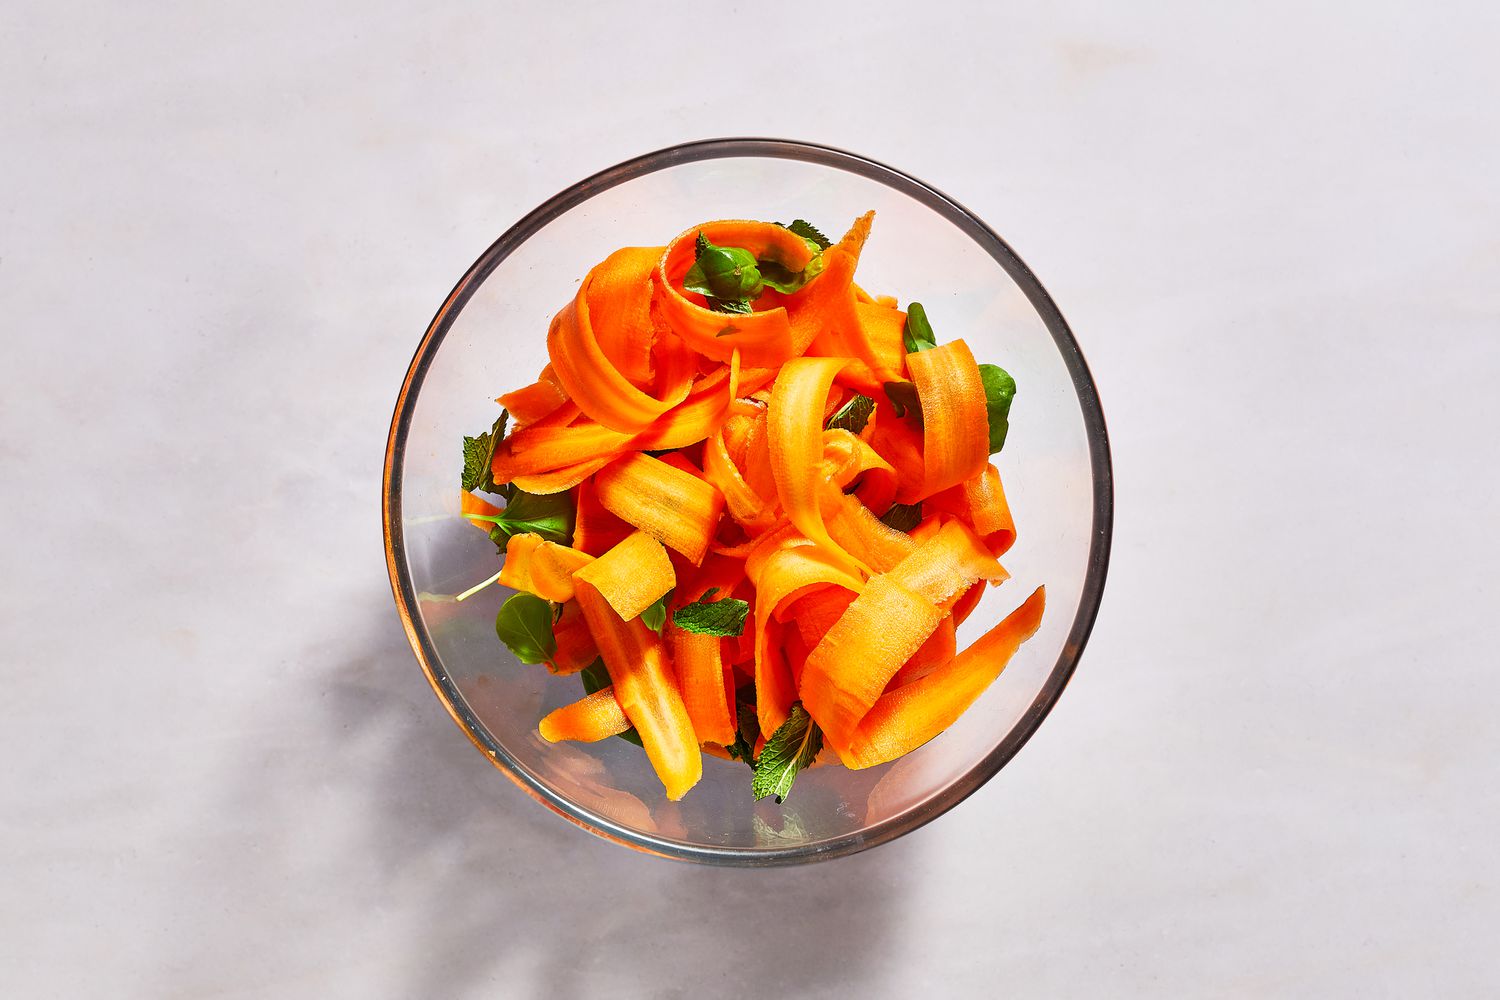 A large bowl of shaved carrot ribbons, mint leaves, and basil leaves